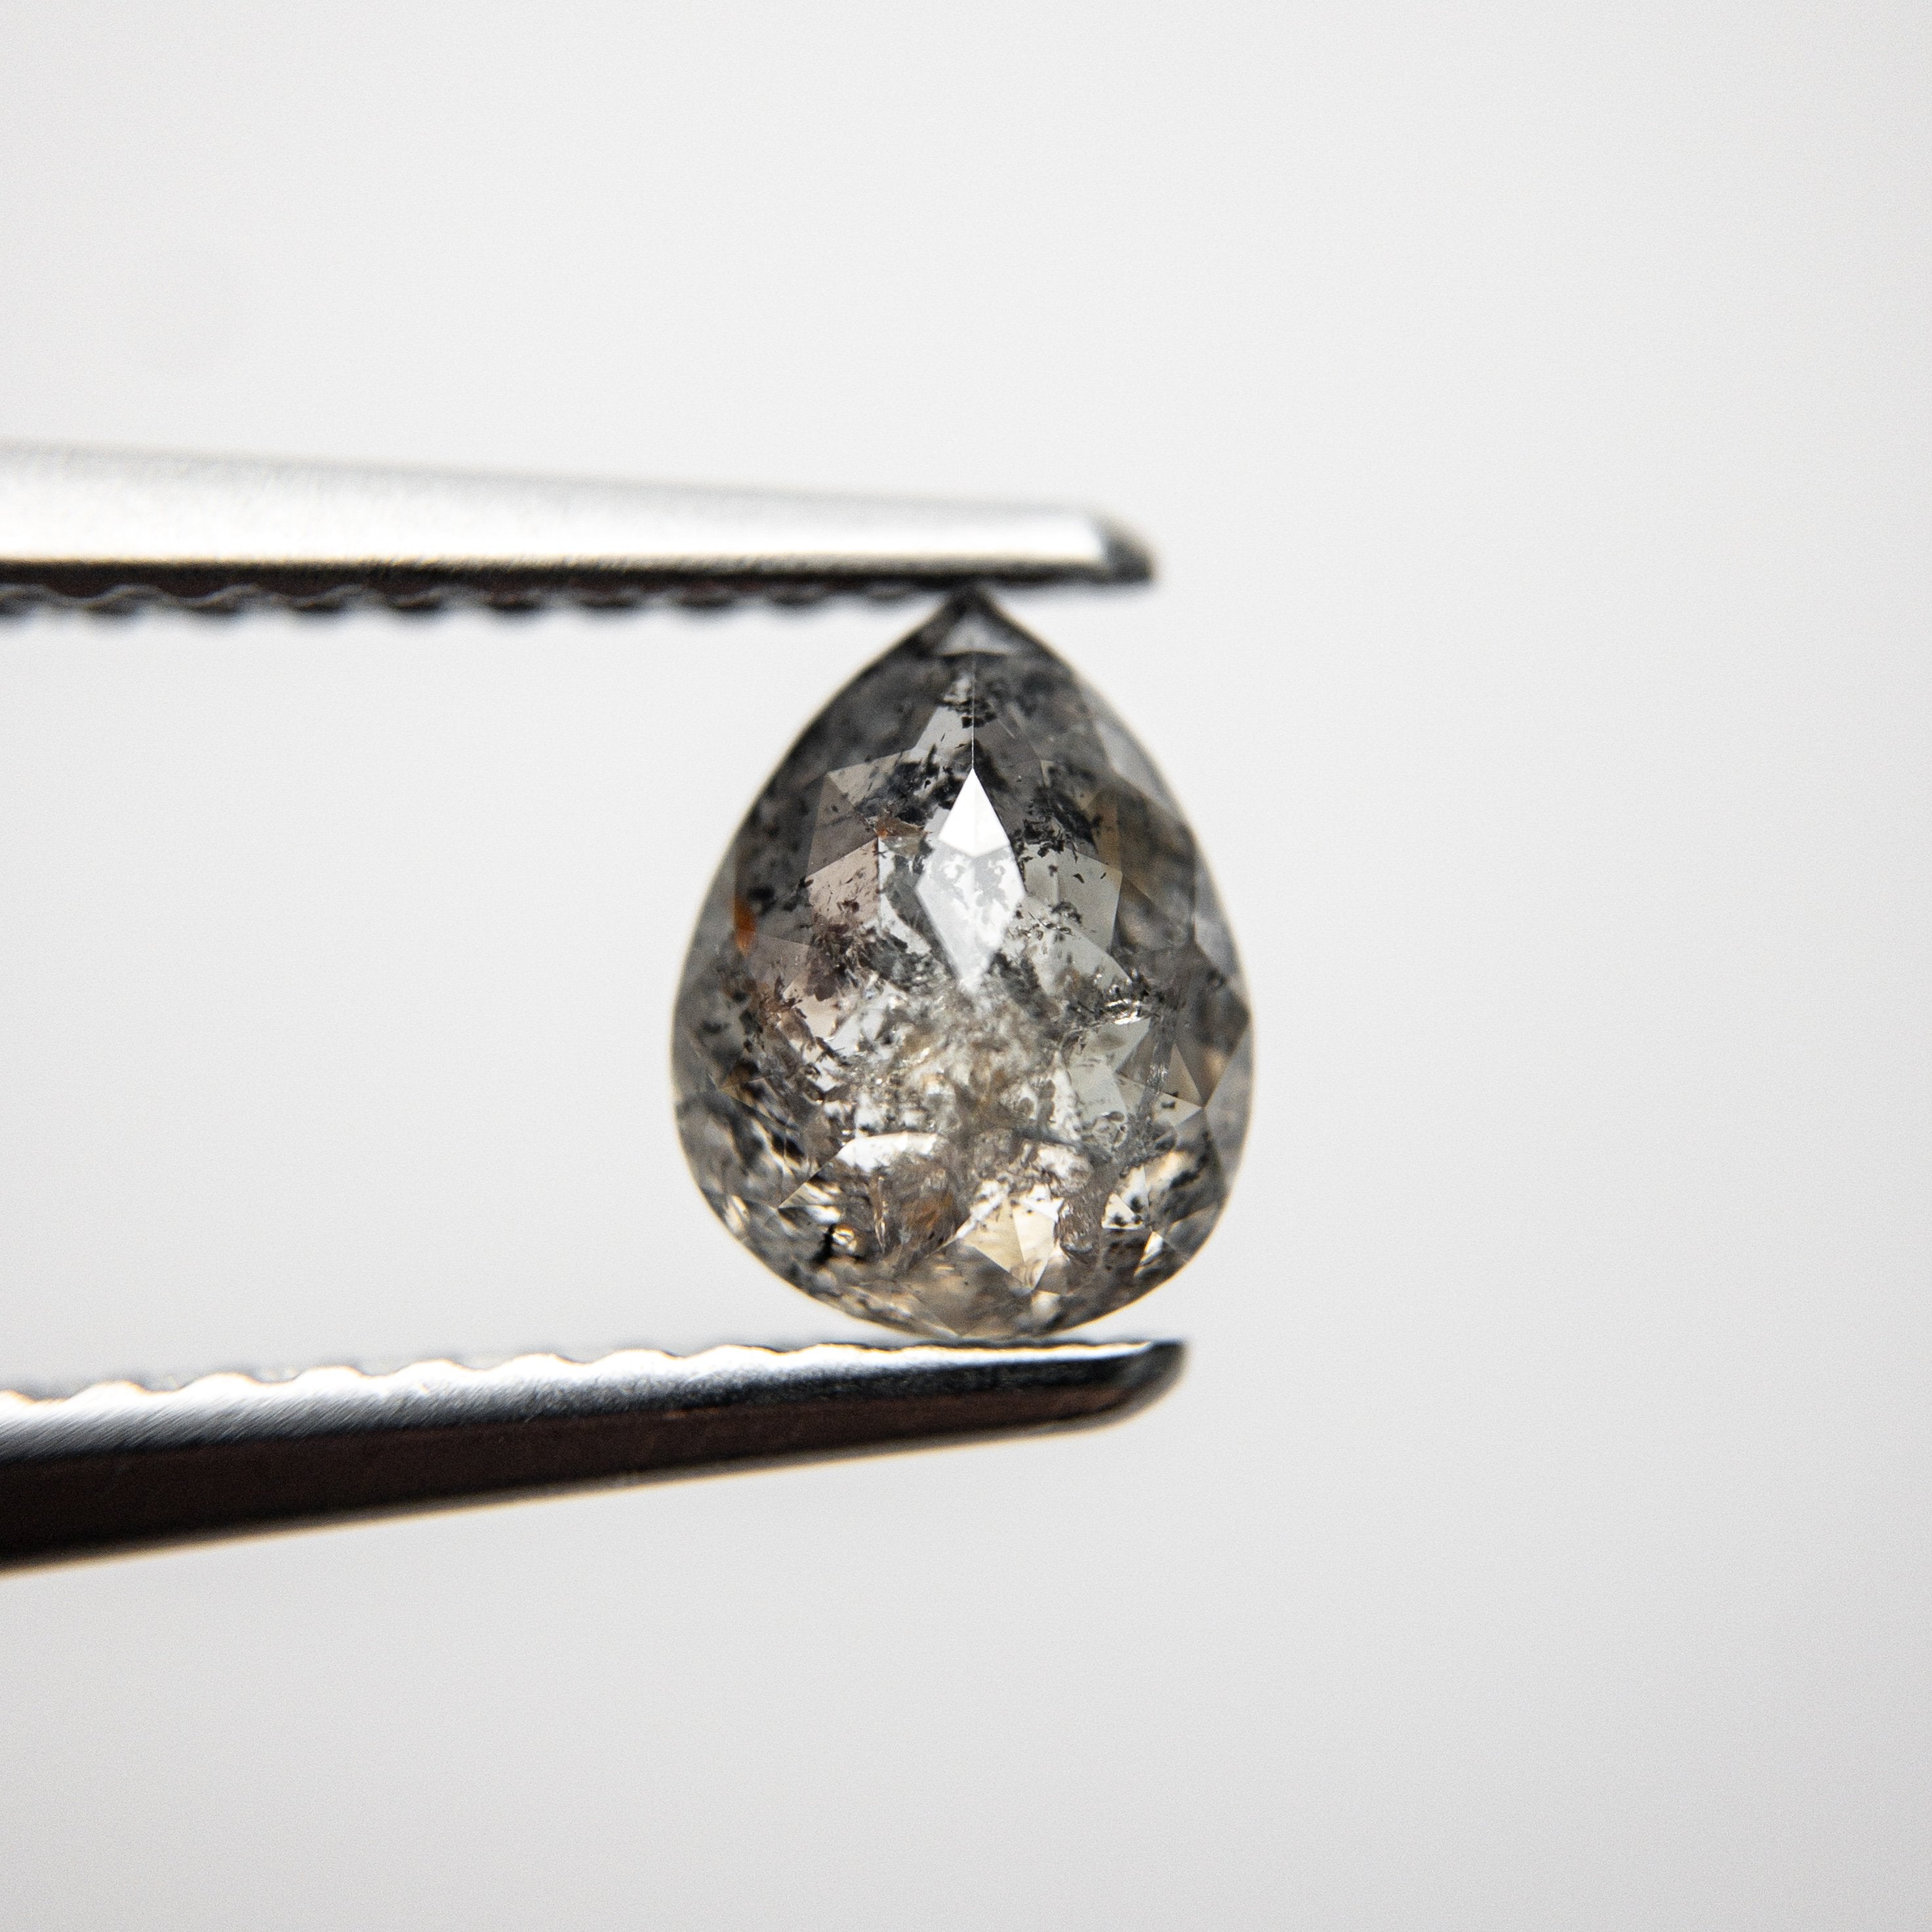 0.96ct 6.905.38x3.28mm Pear Rosecut 18293-08 HOLD